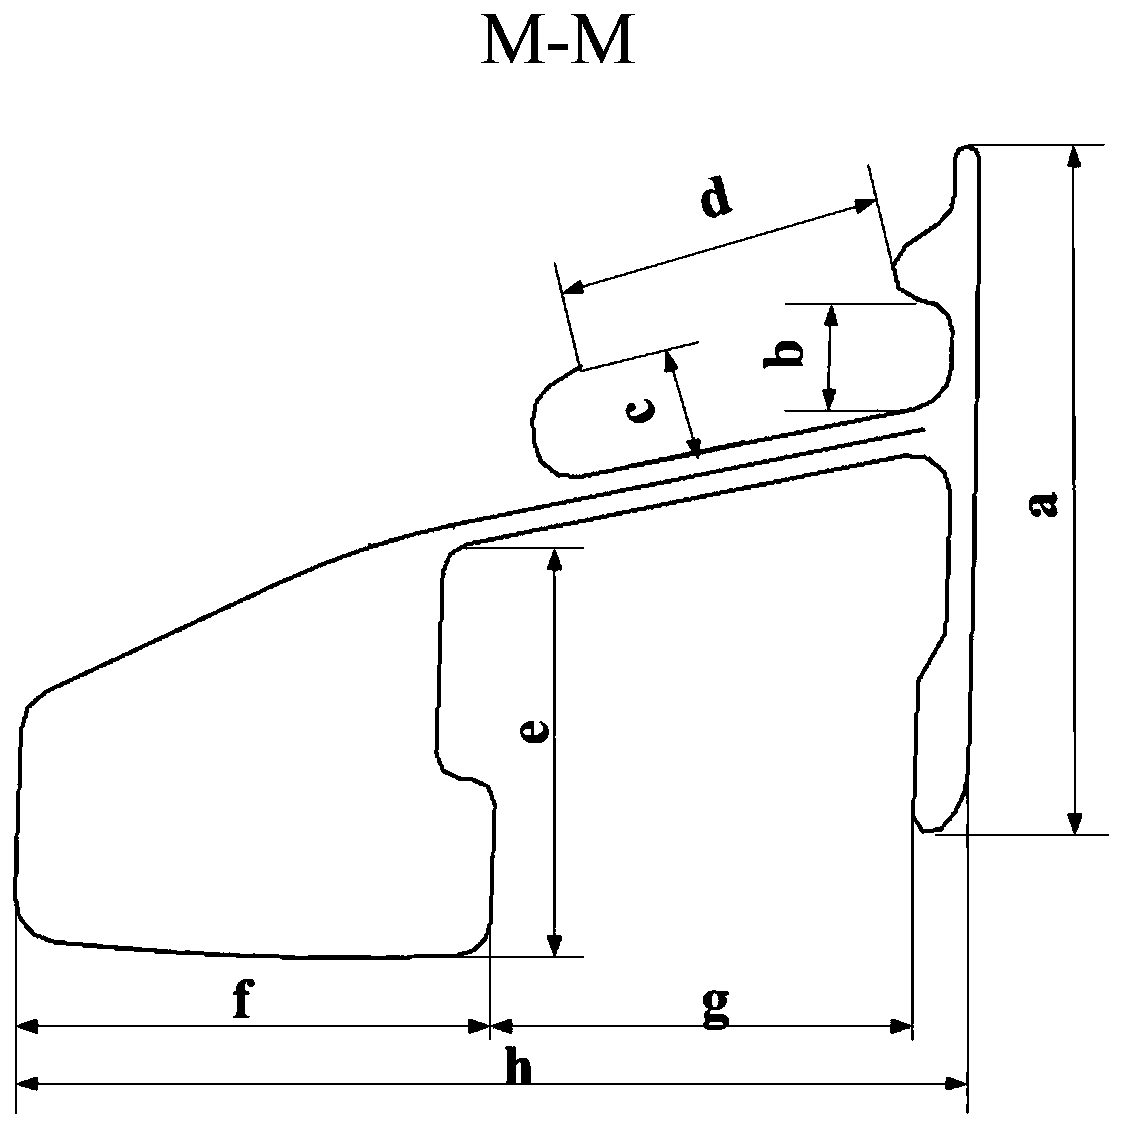 A Prediction, Evaluation and Optimization Method for 3D Stretch Bending Formability of Profiles